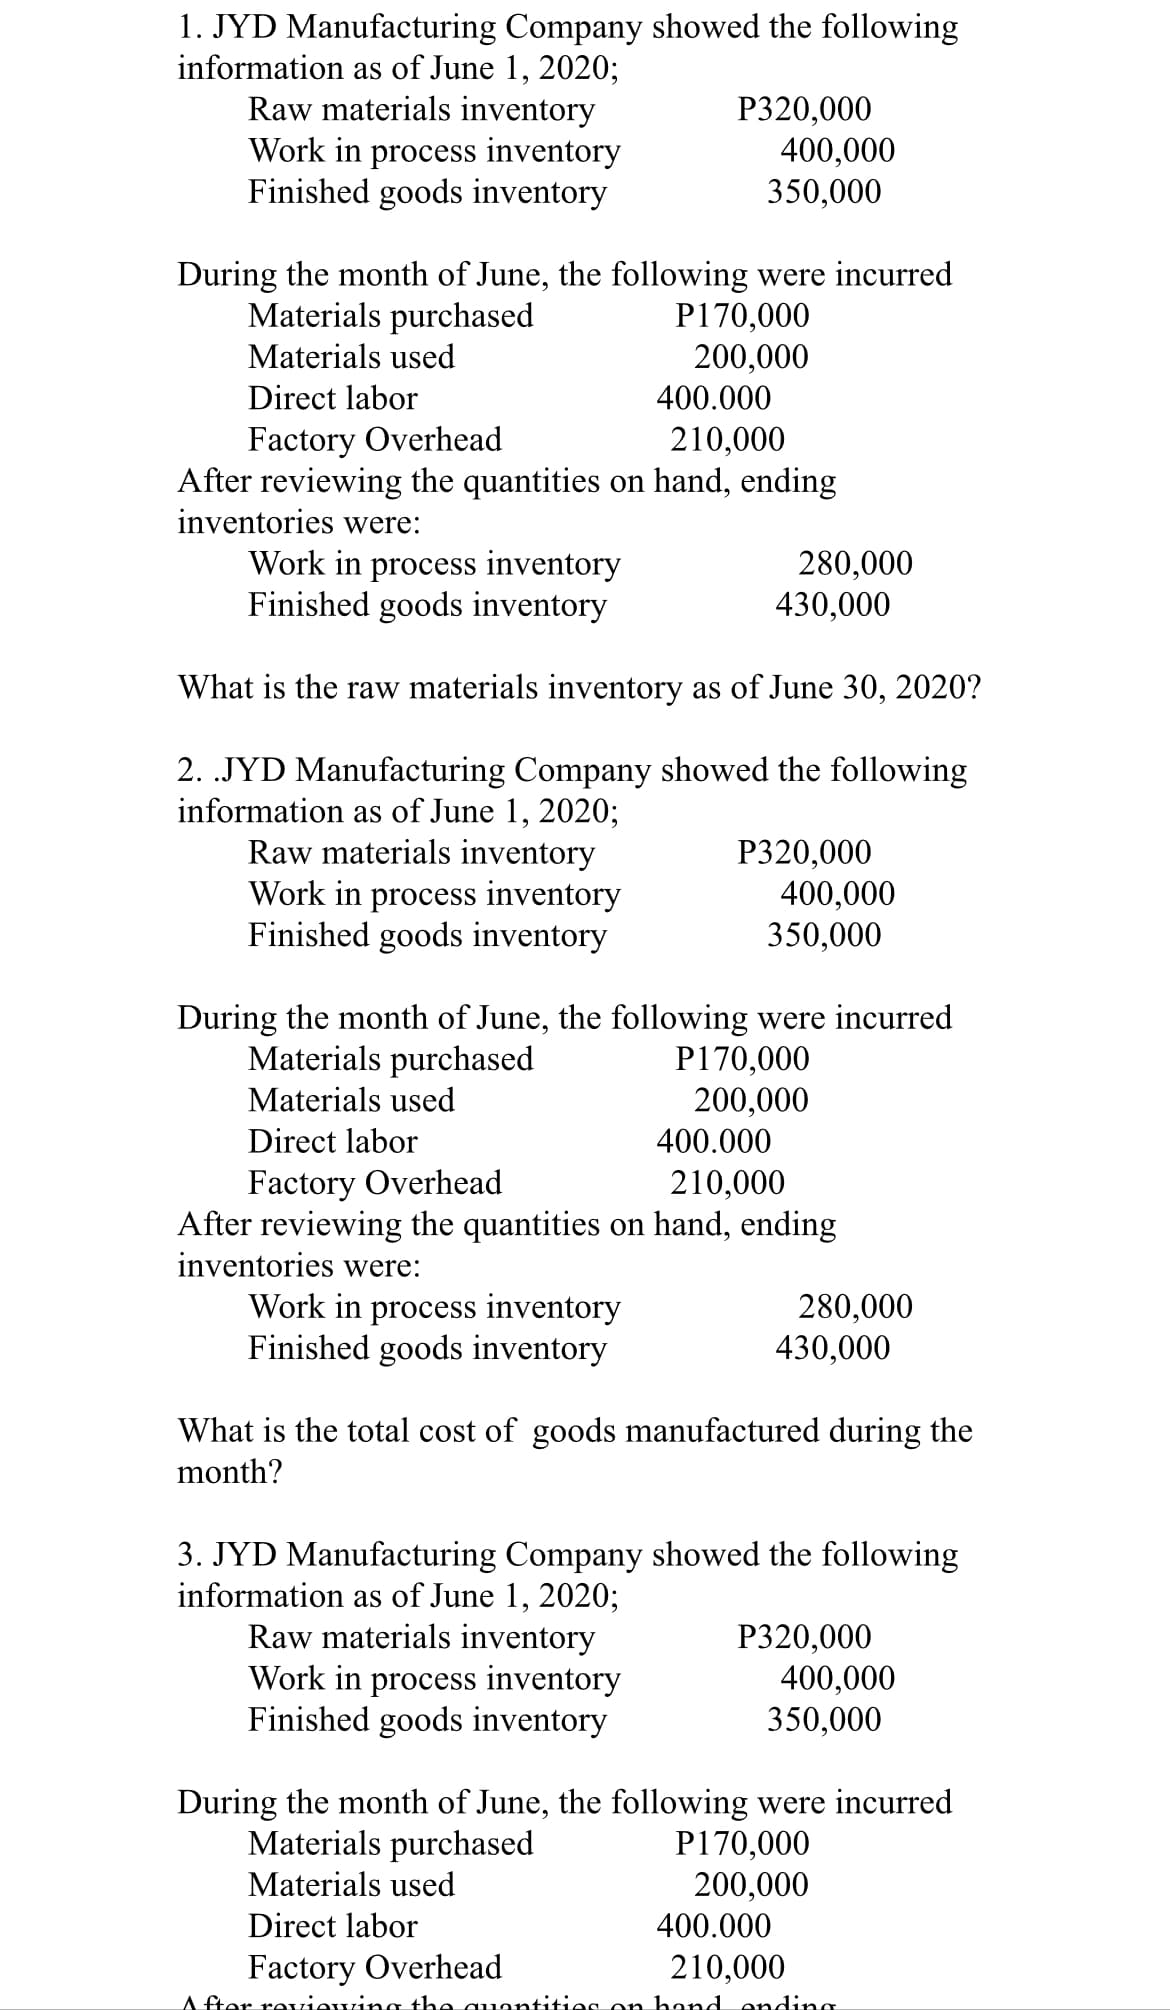 1. JYD Manufacturing Company showed the following
information as of June 1, 2020;
Raw materials inventory
Work in process inventory
Finished goods inventory
Р320,000
400,000
350,000
During the month of June, the following were incurred
Materials purchased
P170,000
200,000
Materials used
Direct labor
400.000
Factory Overhead
After reviewing the quantities on hand, ending
inventories were:
210,000
Work in process inventory
Finished goods inventory
280,000
430,000
What is the raw materials inventory as of June 30, 2020?
2. .JYD Manufacturing Company showed the following
information as of June 1, 2020;
Raw materials inventory
Work in process inventory
Finished goods inventory
Р320,000
400,000
350,000
During the month of June, the following were incurred
Materials purchased
P170,000
200,000
Materials used
Direct labor
400.000
Factory Overhead
After reviewing the quantities on hand, ending
inventories were:
210,000
Work in process inventory
Finished goods inventory
280,000
430,000
What is the total cost of goods manufactured during the
month?
3. JYD Manufacturing Company showed the following
information as of June 1, 2020;
Raw materials inventory
Work in process inventory
Finished goods inventory
P320,000
400,000
350,000
During the month of June, the following were incurred
Materials purchased
P170,000
200,000
Materials used
Direct labor
400.000
Factory Overhead
210,000
A fter reviewing the quontities on hand onding
